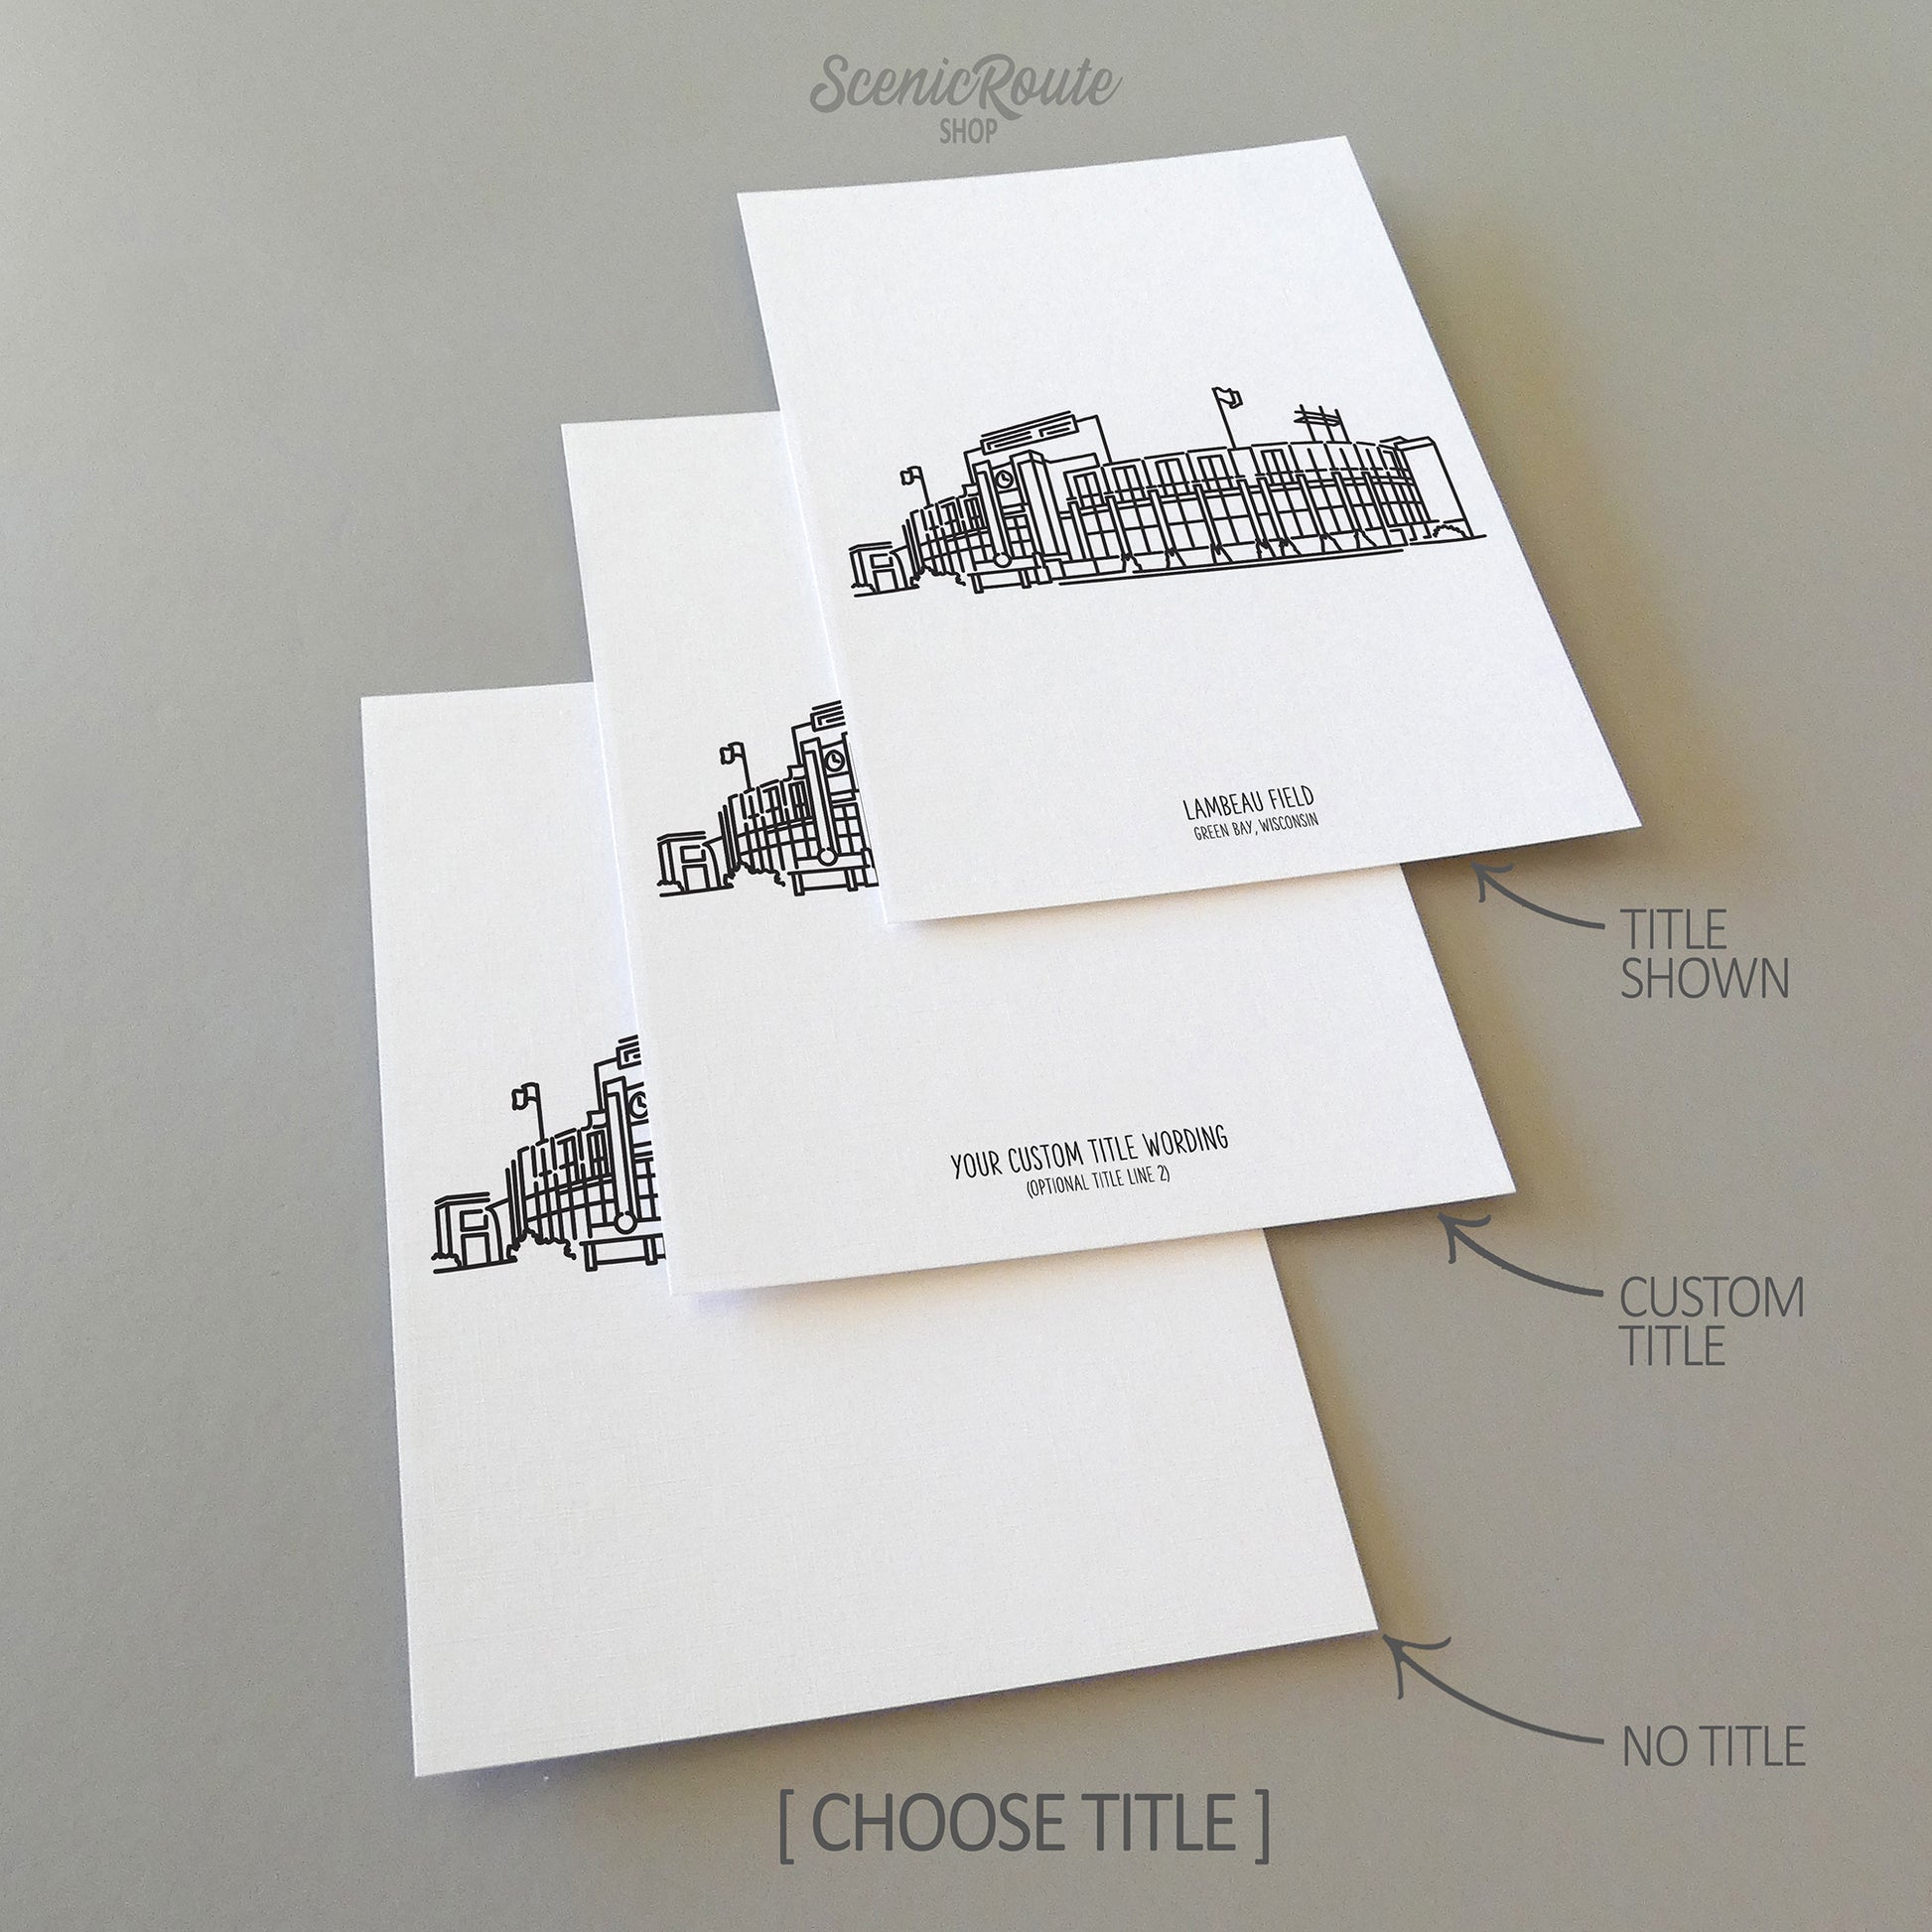 Three line art drawings of the Green Bay Packers Lambeau Field on white linen paper with a gray background.  The pieces are shown with title options that can be chosen and personalized.